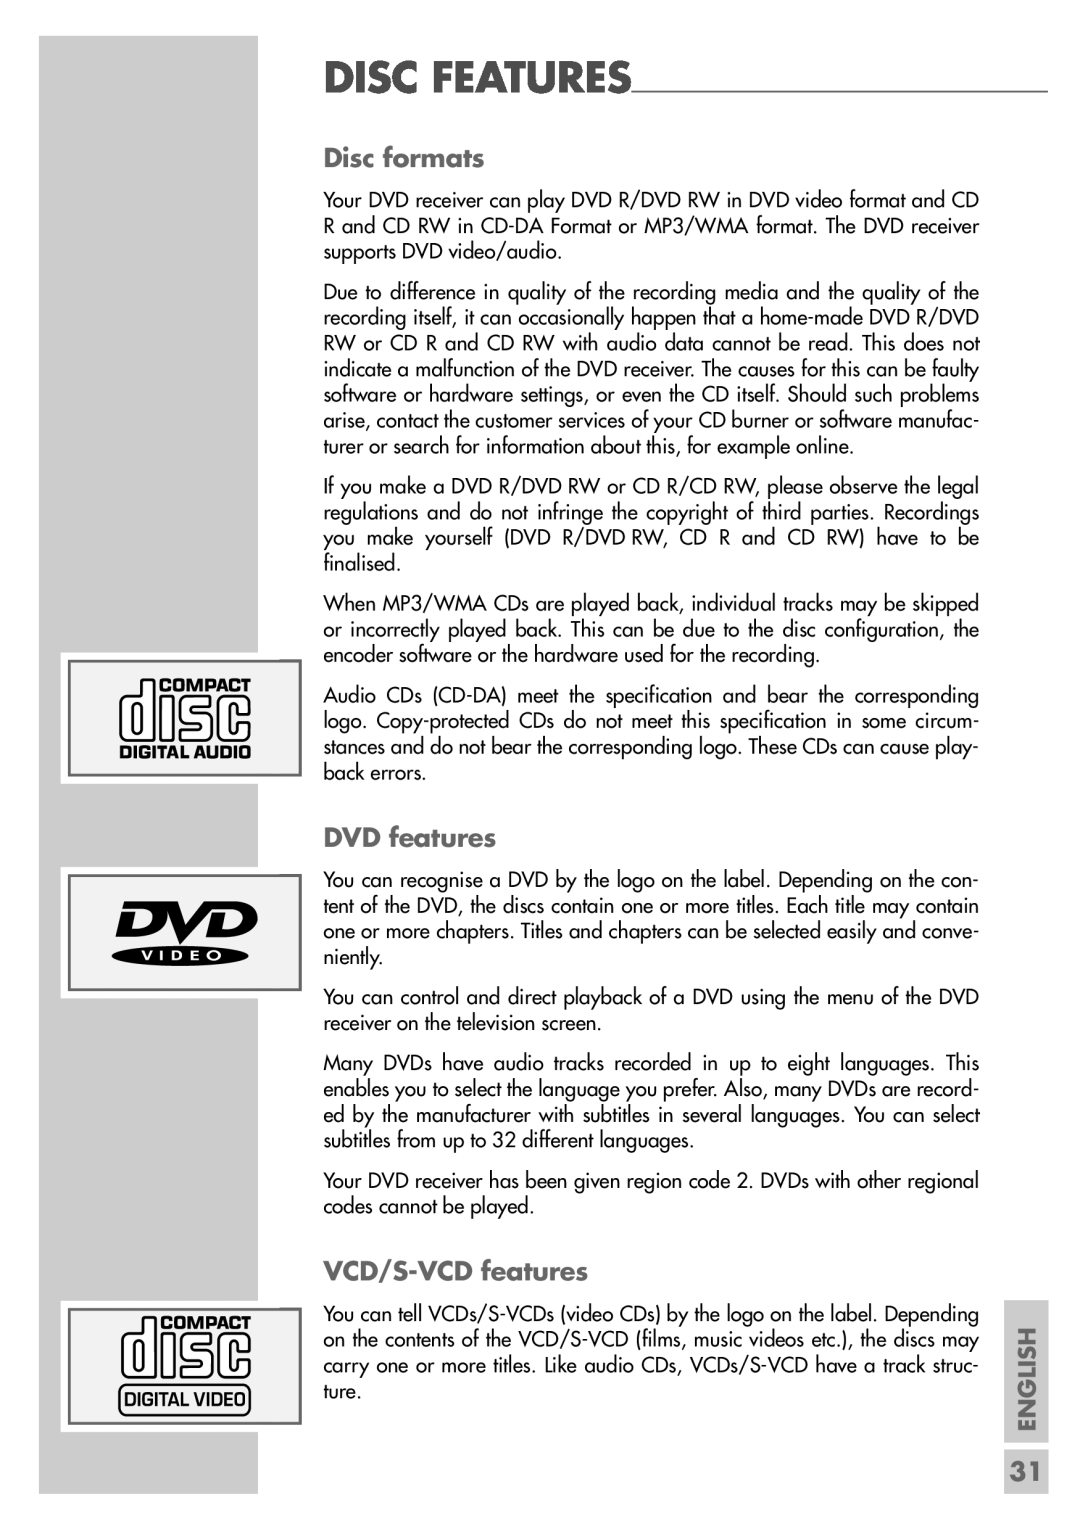 Grundig DR 5400 DD manual Disc formats, DVD features, VCD/S-VCDfeatures, English 